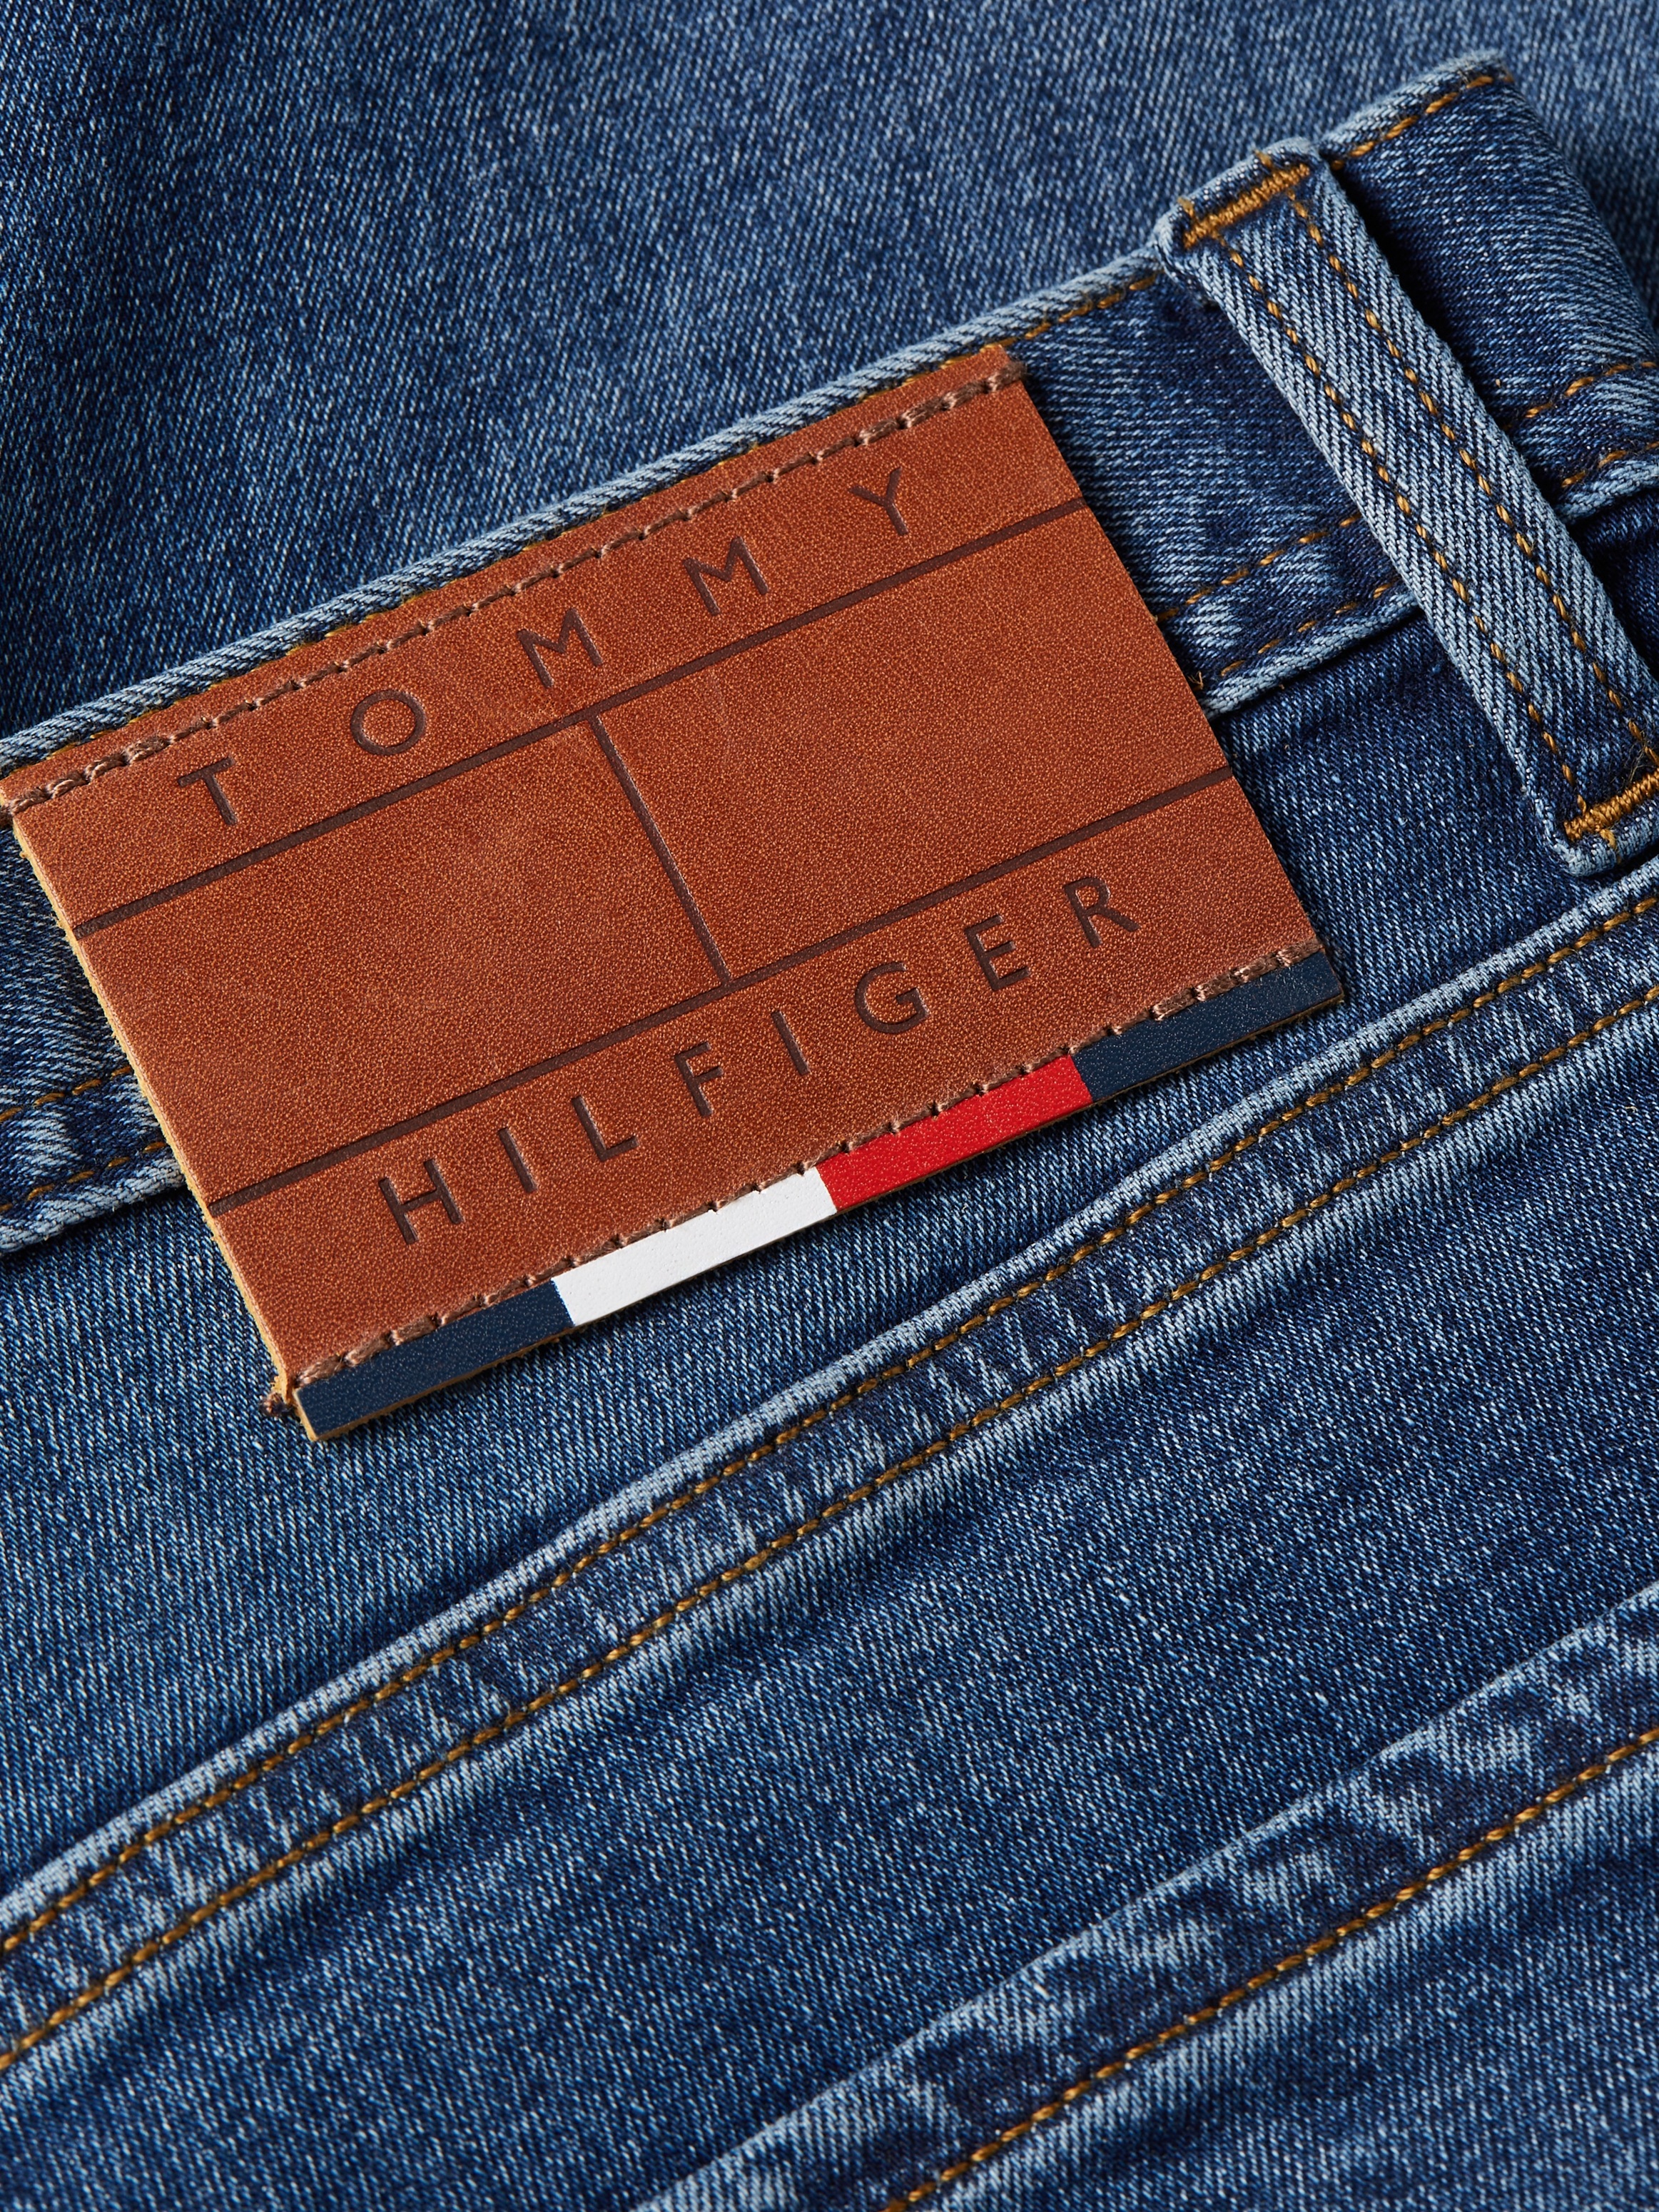 »TAPERED TUMON« bei Hilfiger 5-Pocket-Jeans HOUSTON TH FLEX ♕ Tommy